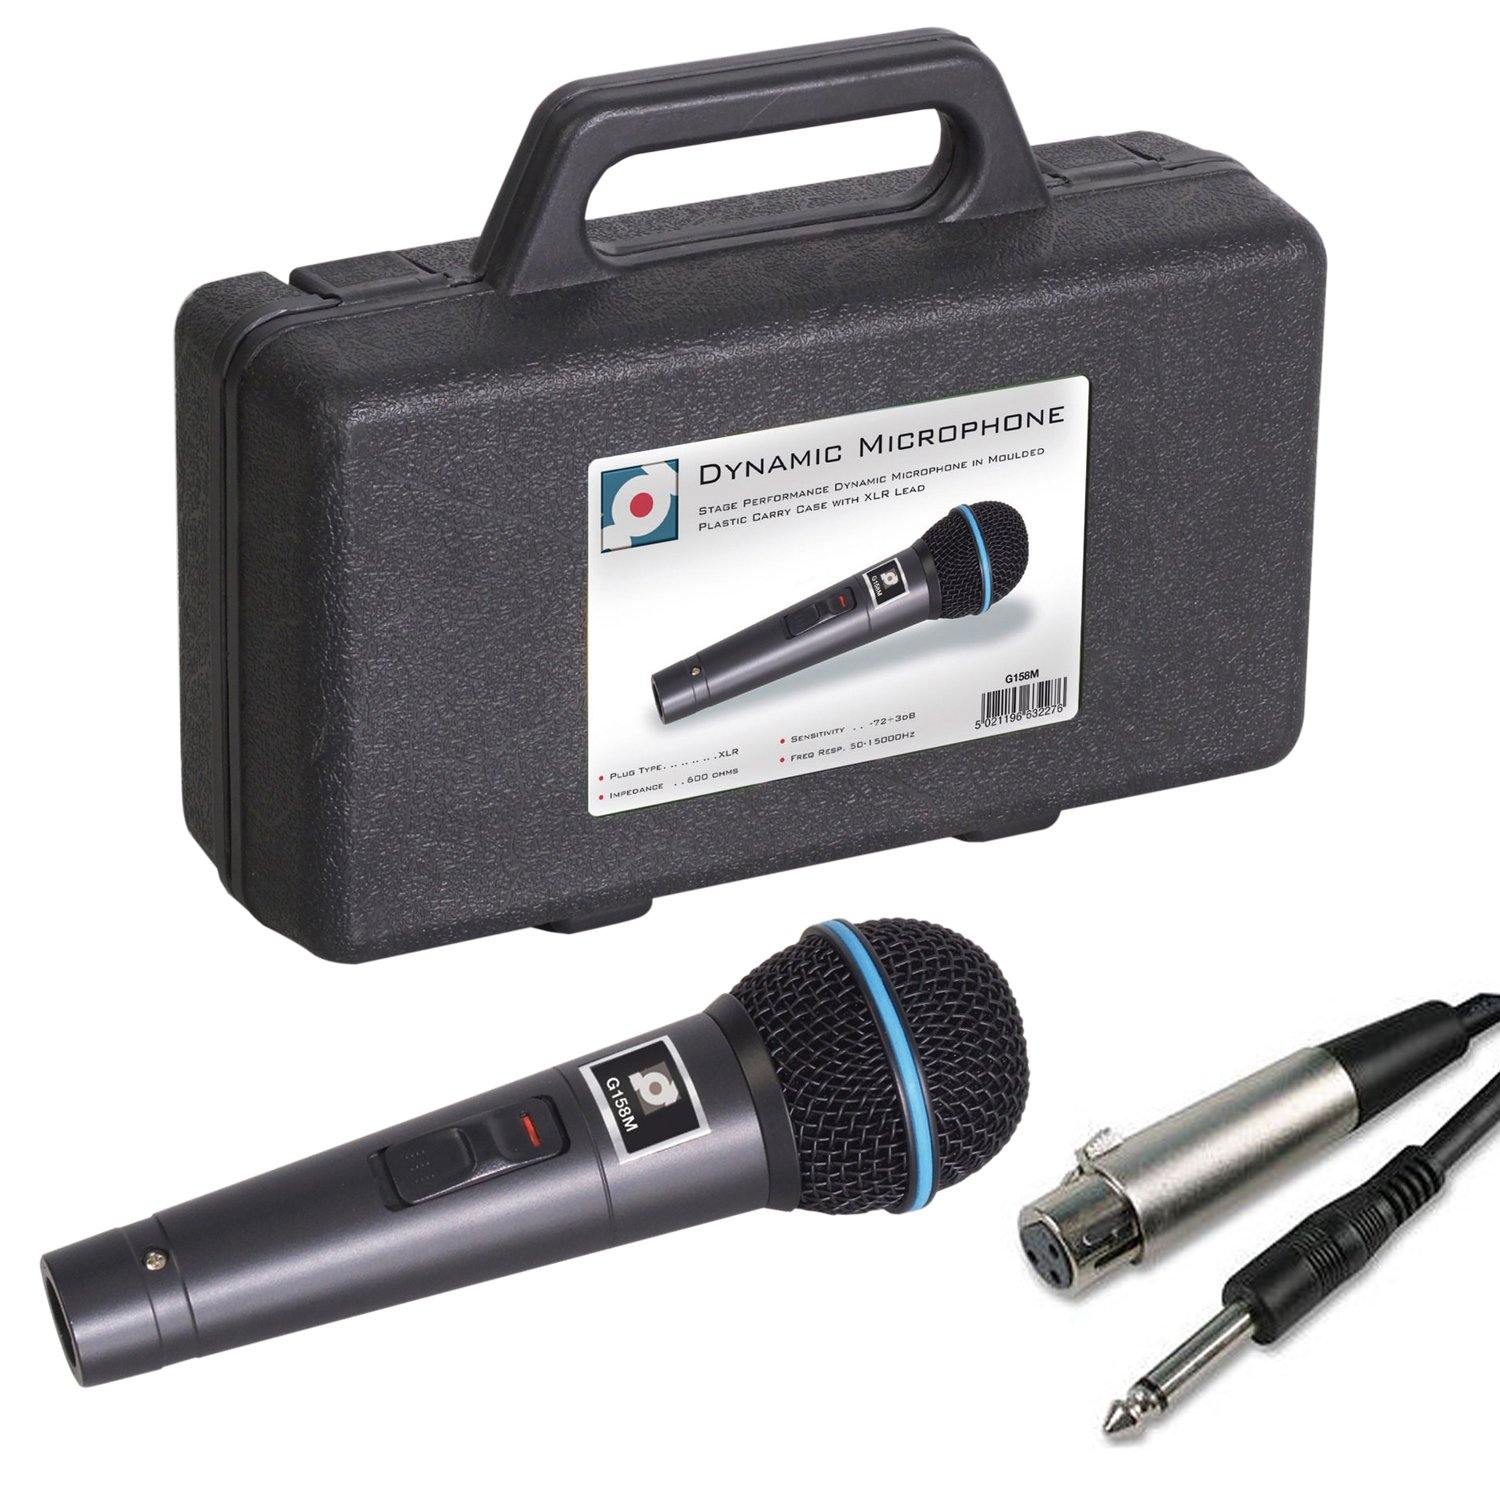 Soundlab Dynamic Microphone With Carry Case & Cable - DY Pro Audio